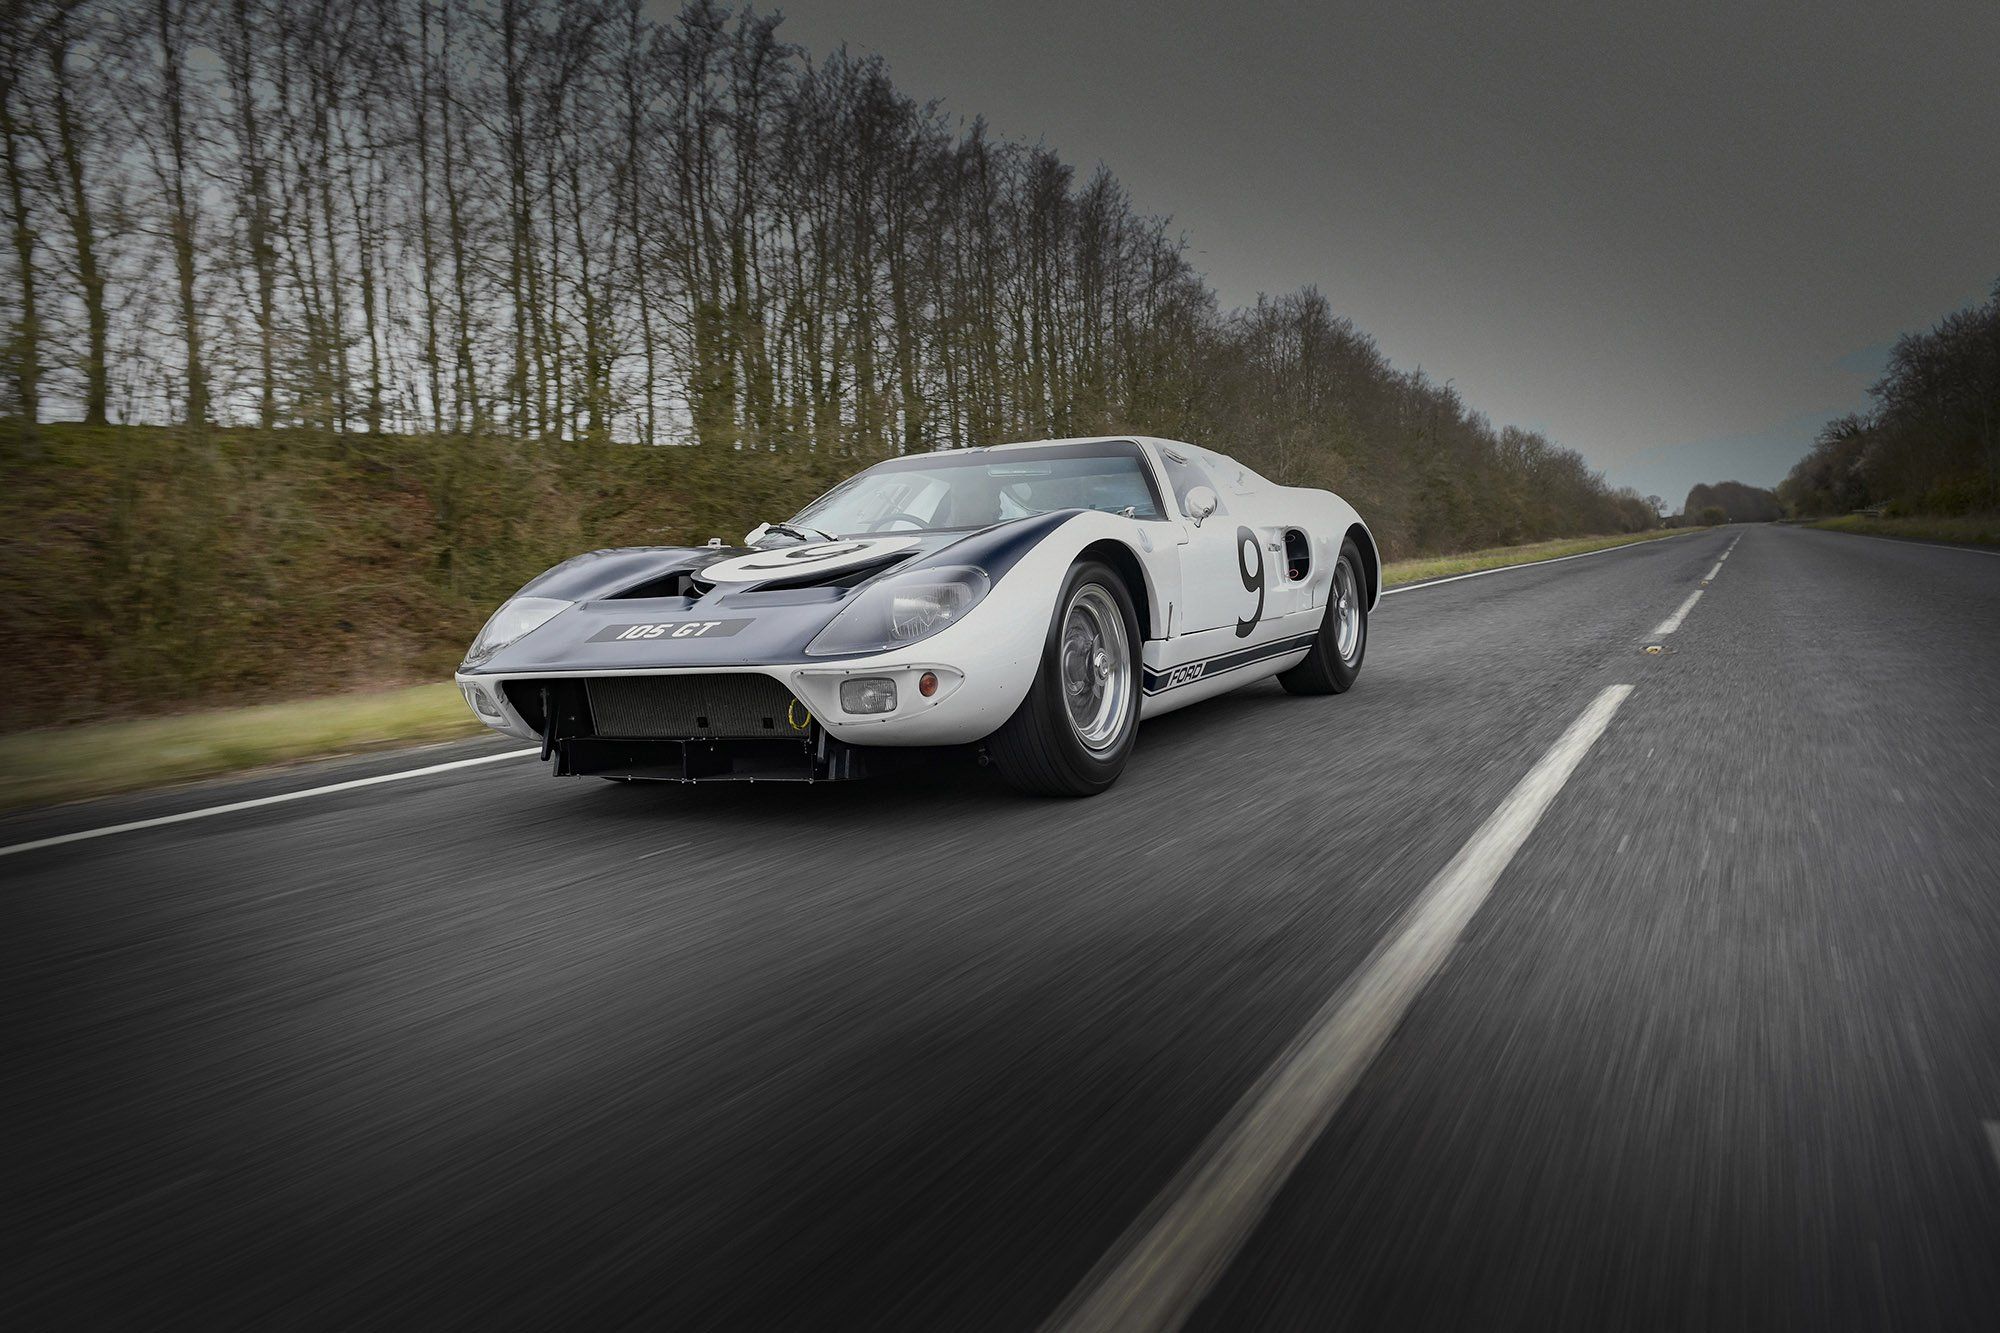 1964 Ford GT40 Prototype GT/105 for Sale Info